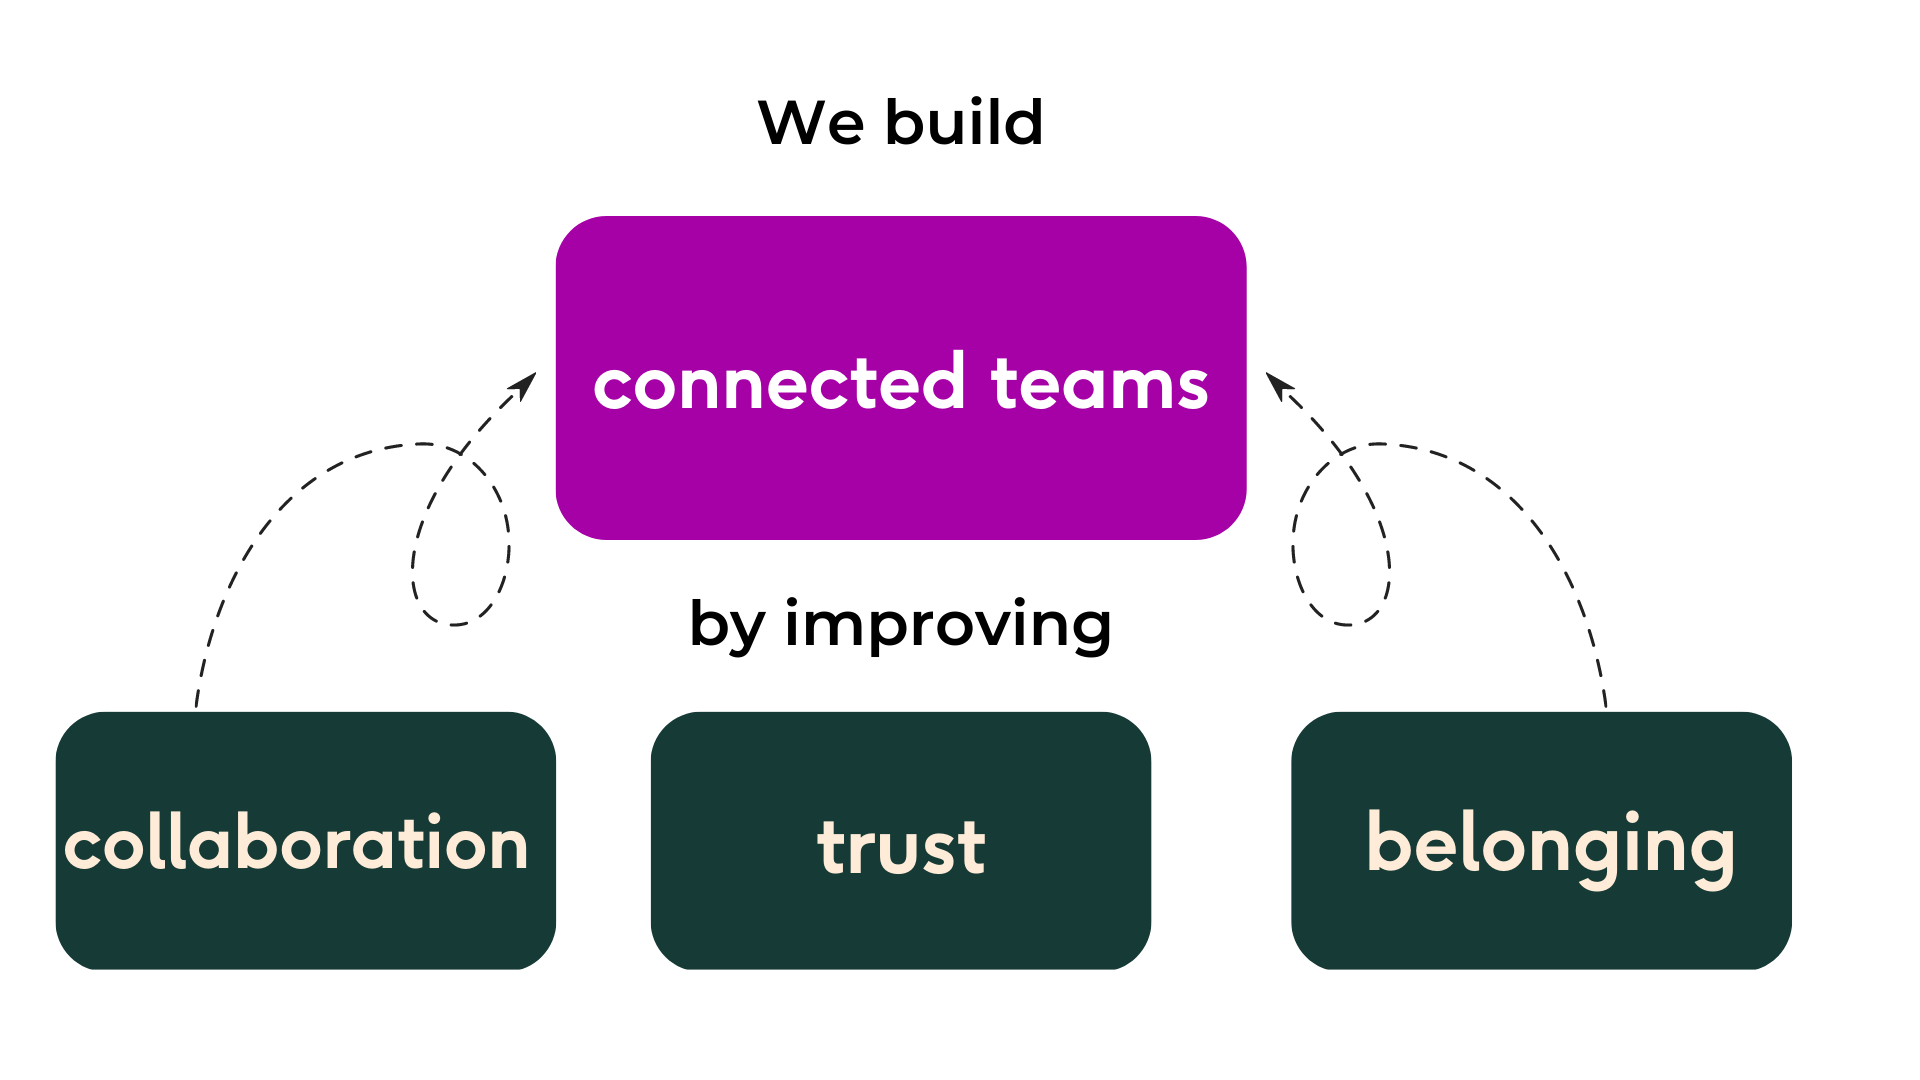 We build connected teams by improving collaboration, trust, and belonging